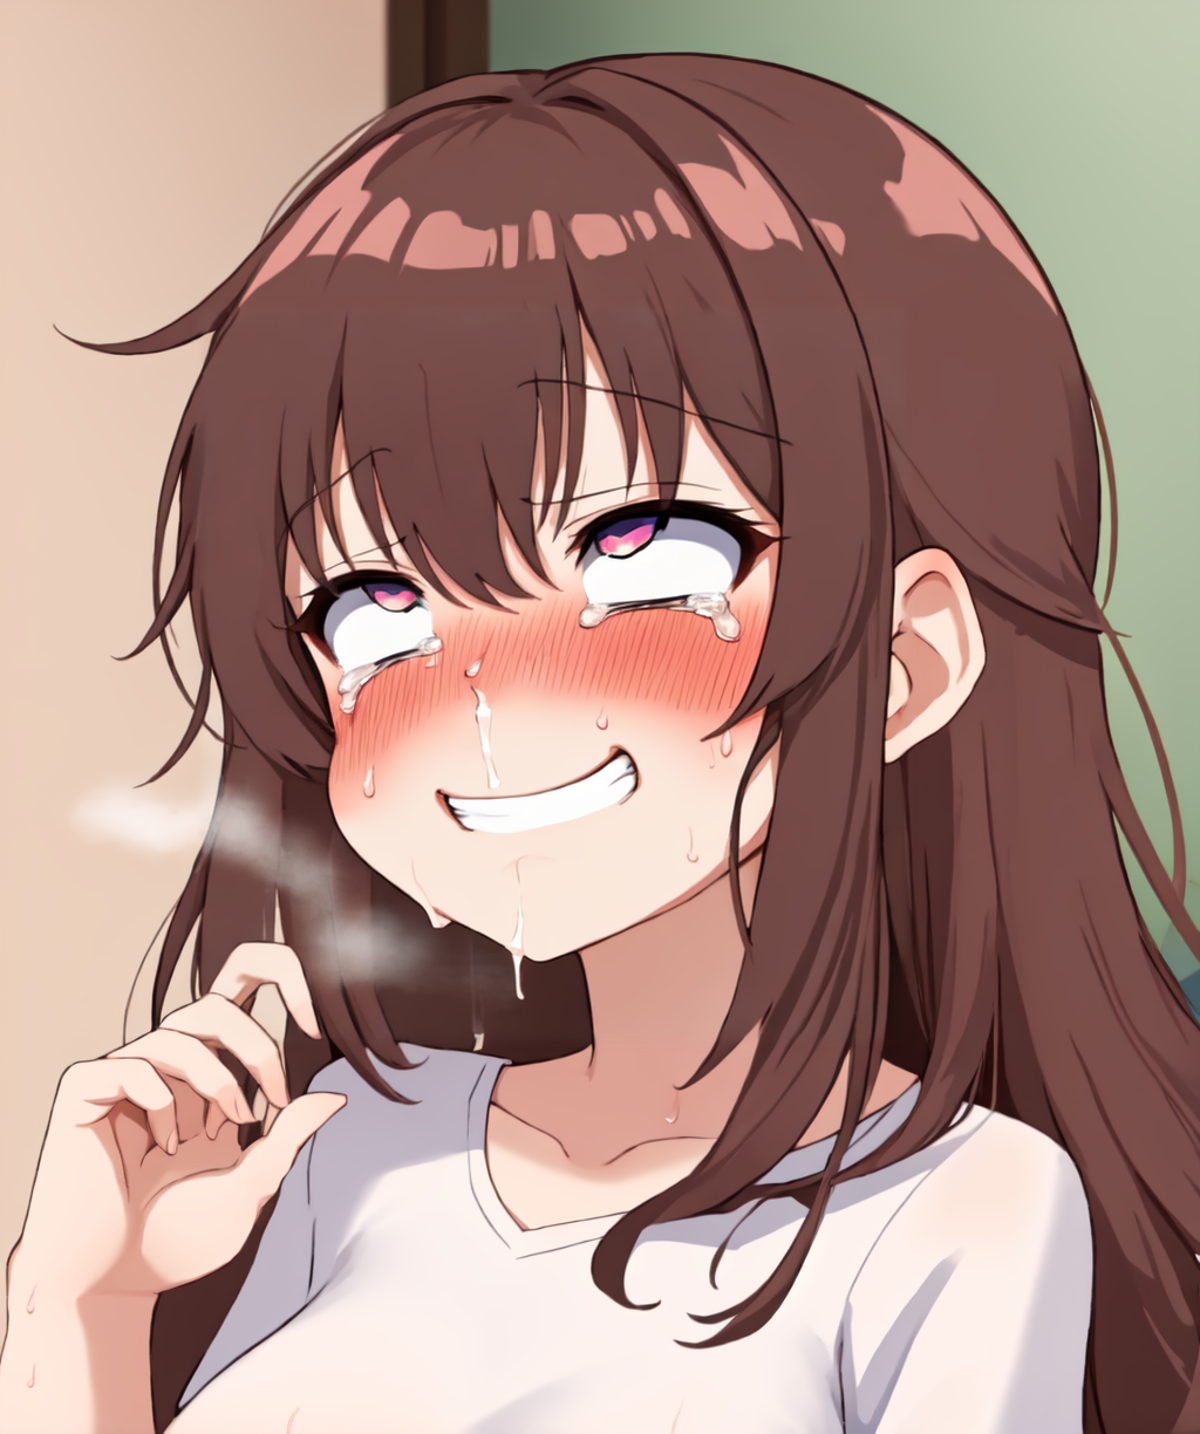 Ahegao / rolling eyes image by boolosoi